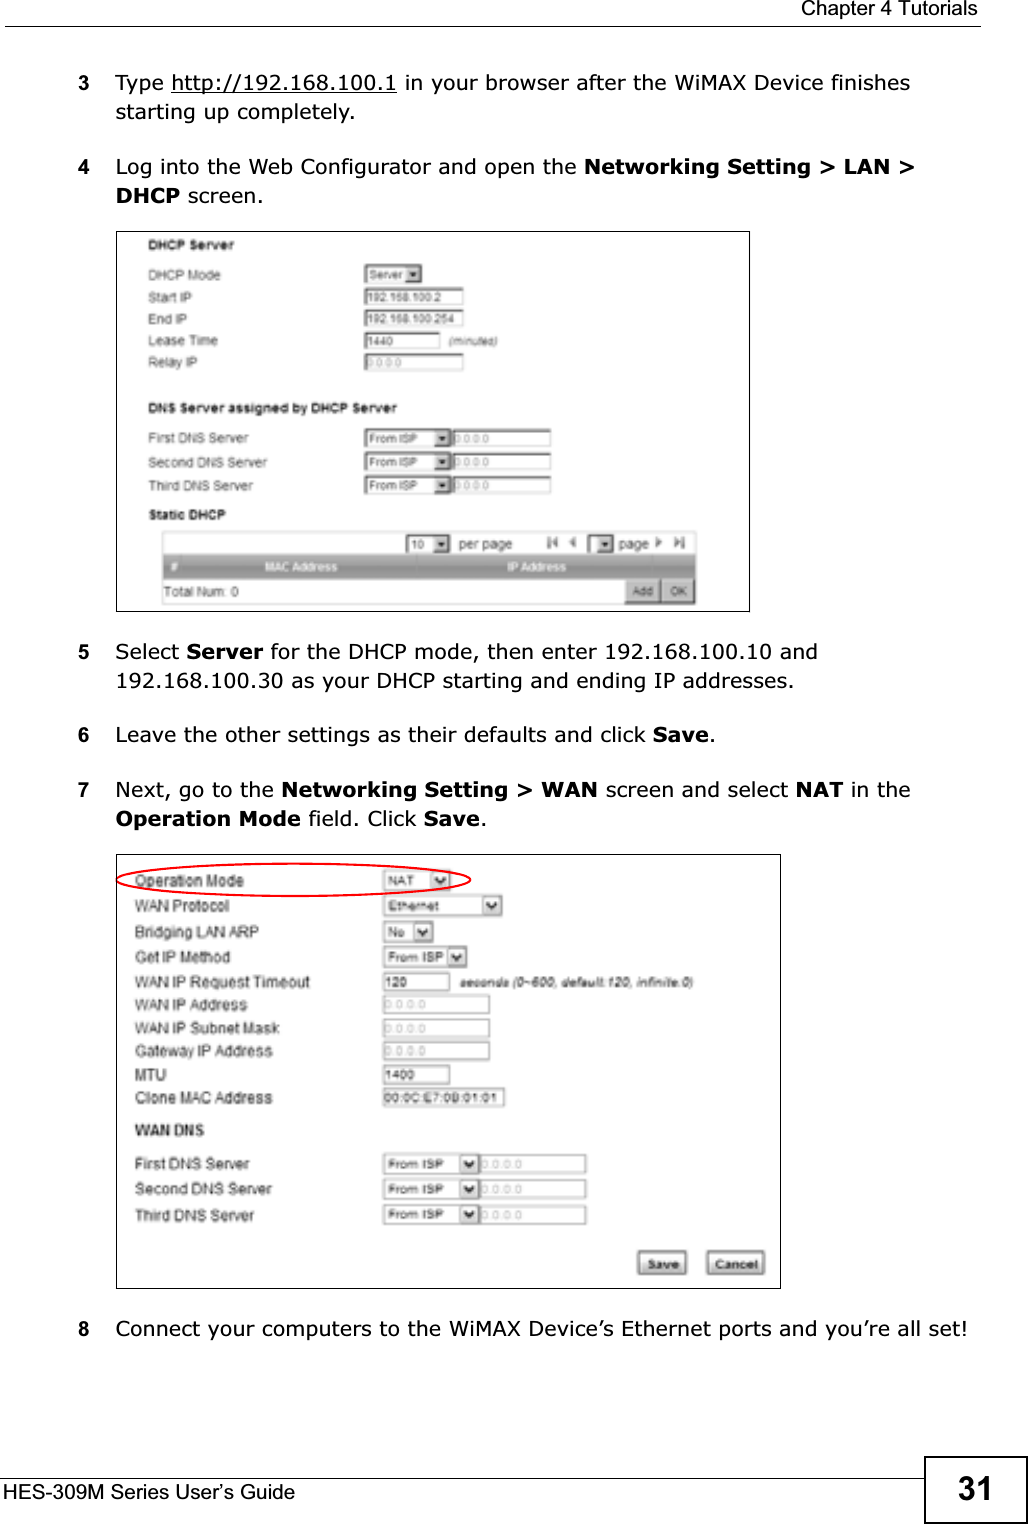  Chapter 4 TutorialsHES-309M Series User’s Guide 313Type http://192.168.100.1 in your browser after the WiMAX Device finishes starting up completely.4Log into the Web Configurator and open the Networking Setting &gt; LAN &gt; DHCP screen.5Select Server for the DHCP mode, then enter 192.168.100.10 and 192.168.100.30 as your DHCP starting and ending IP addresses.6Leave the other settings as their defaults and click Save.7Next, go to the Networking Setting &gt; WAN screen and select NAT in the Operation Mode field. Click Save.8Connect your computers to the WiMAX Device’s Ethernet ports and you’re all set!